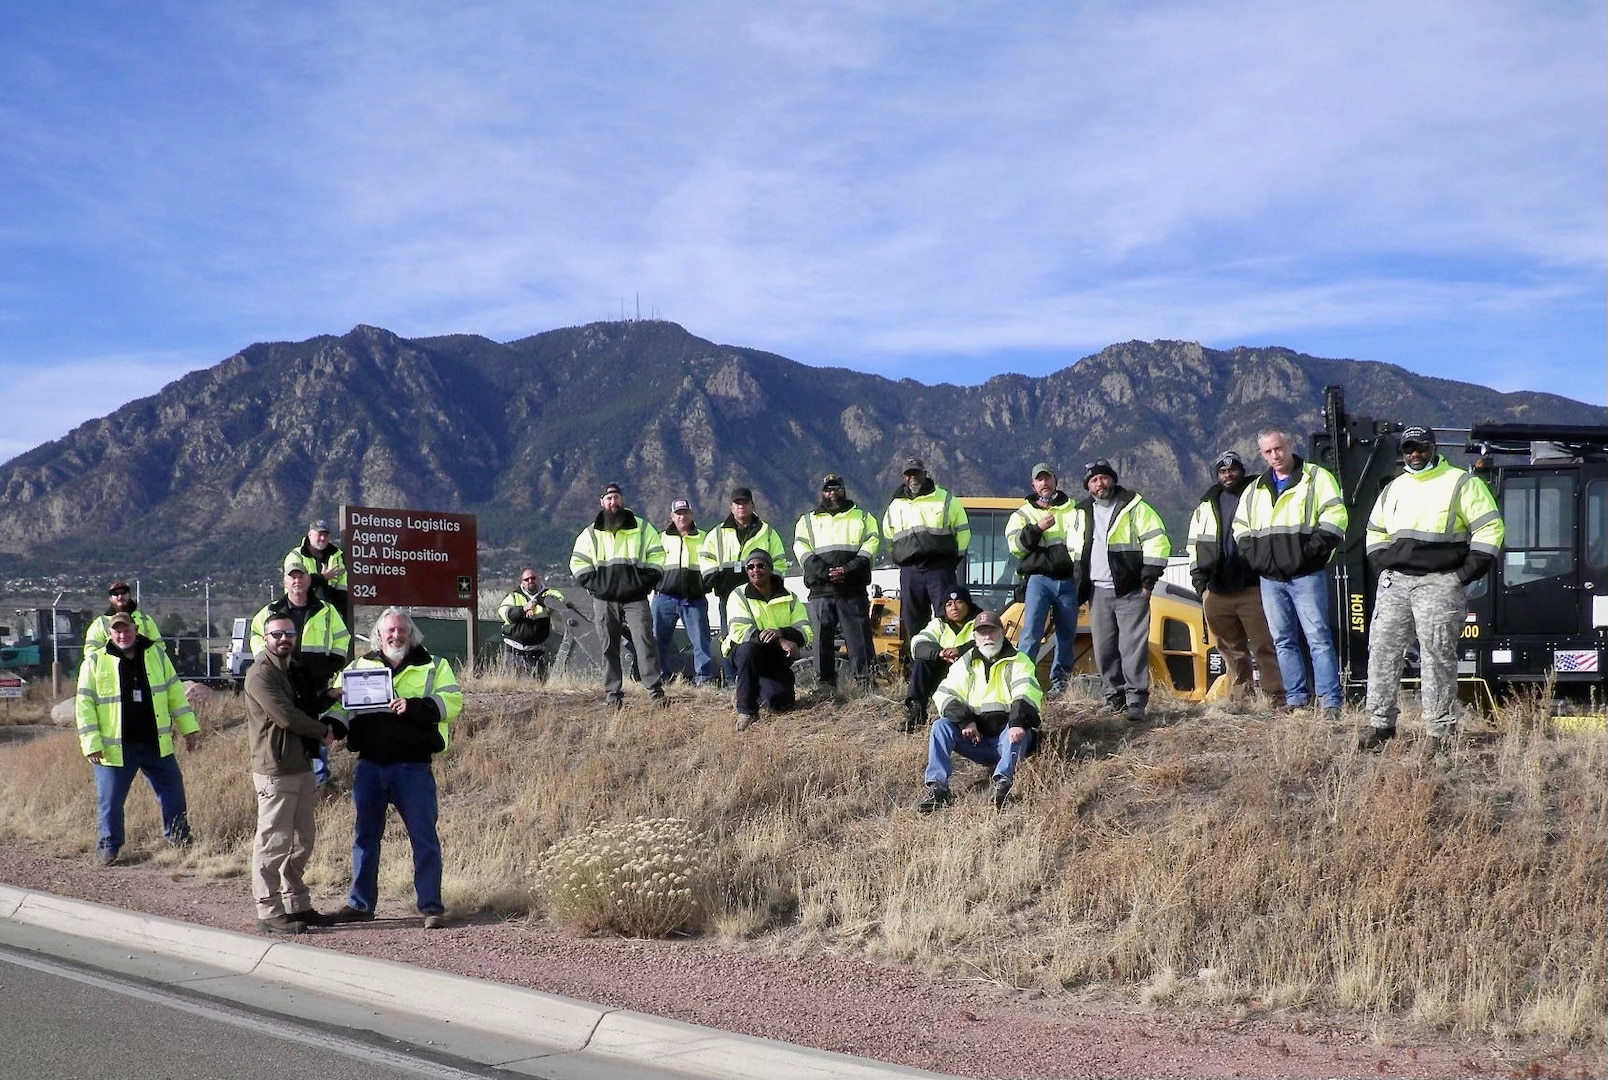 the team at DLA Disposition Services Colorado Springs sand outside in a lose group photo